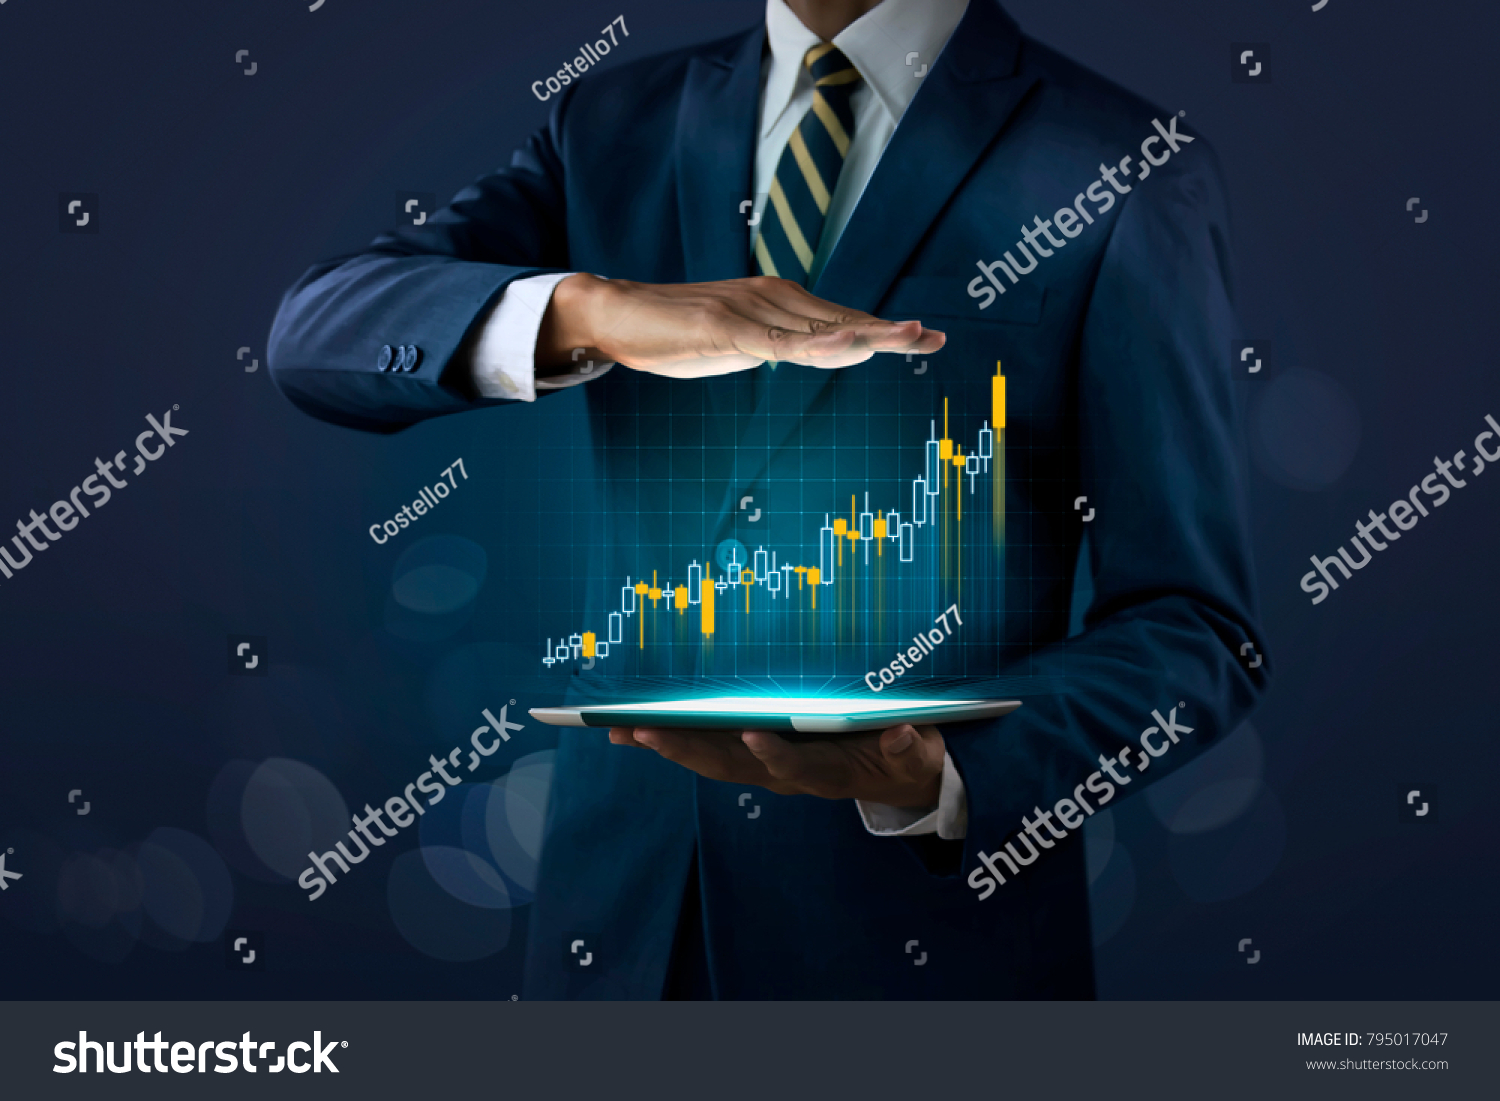 Business growth, progress or success concept. Businessman is showing a growing virtual hologram stock on dark tone background. #795017047